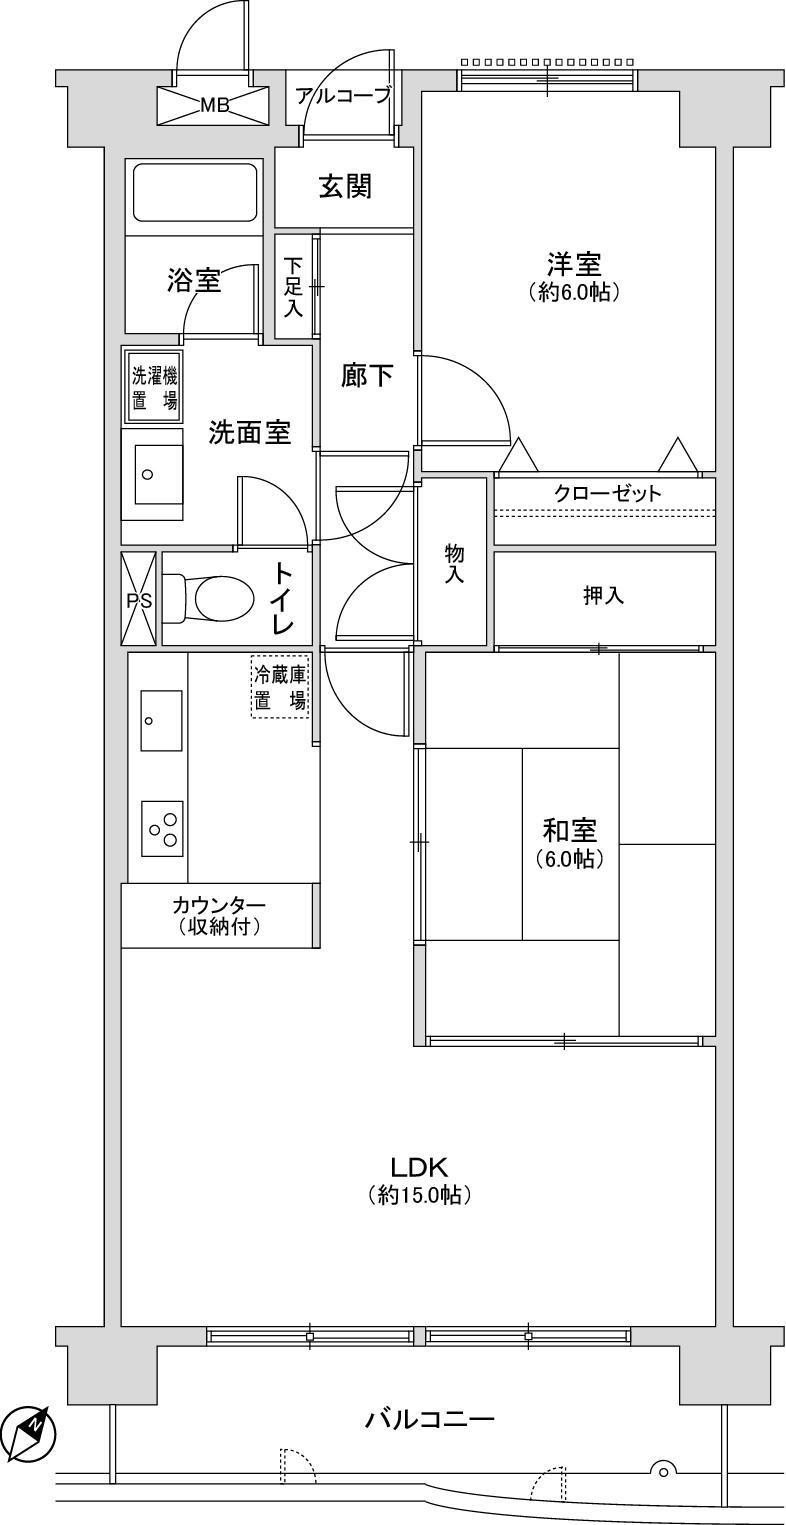 Floor plan. 2LDK, Price 18 million yen, Footprint 61.5 sq m , Balcony area 7.7 sq m   [Floor plan] All rooms are equipped with lighting!